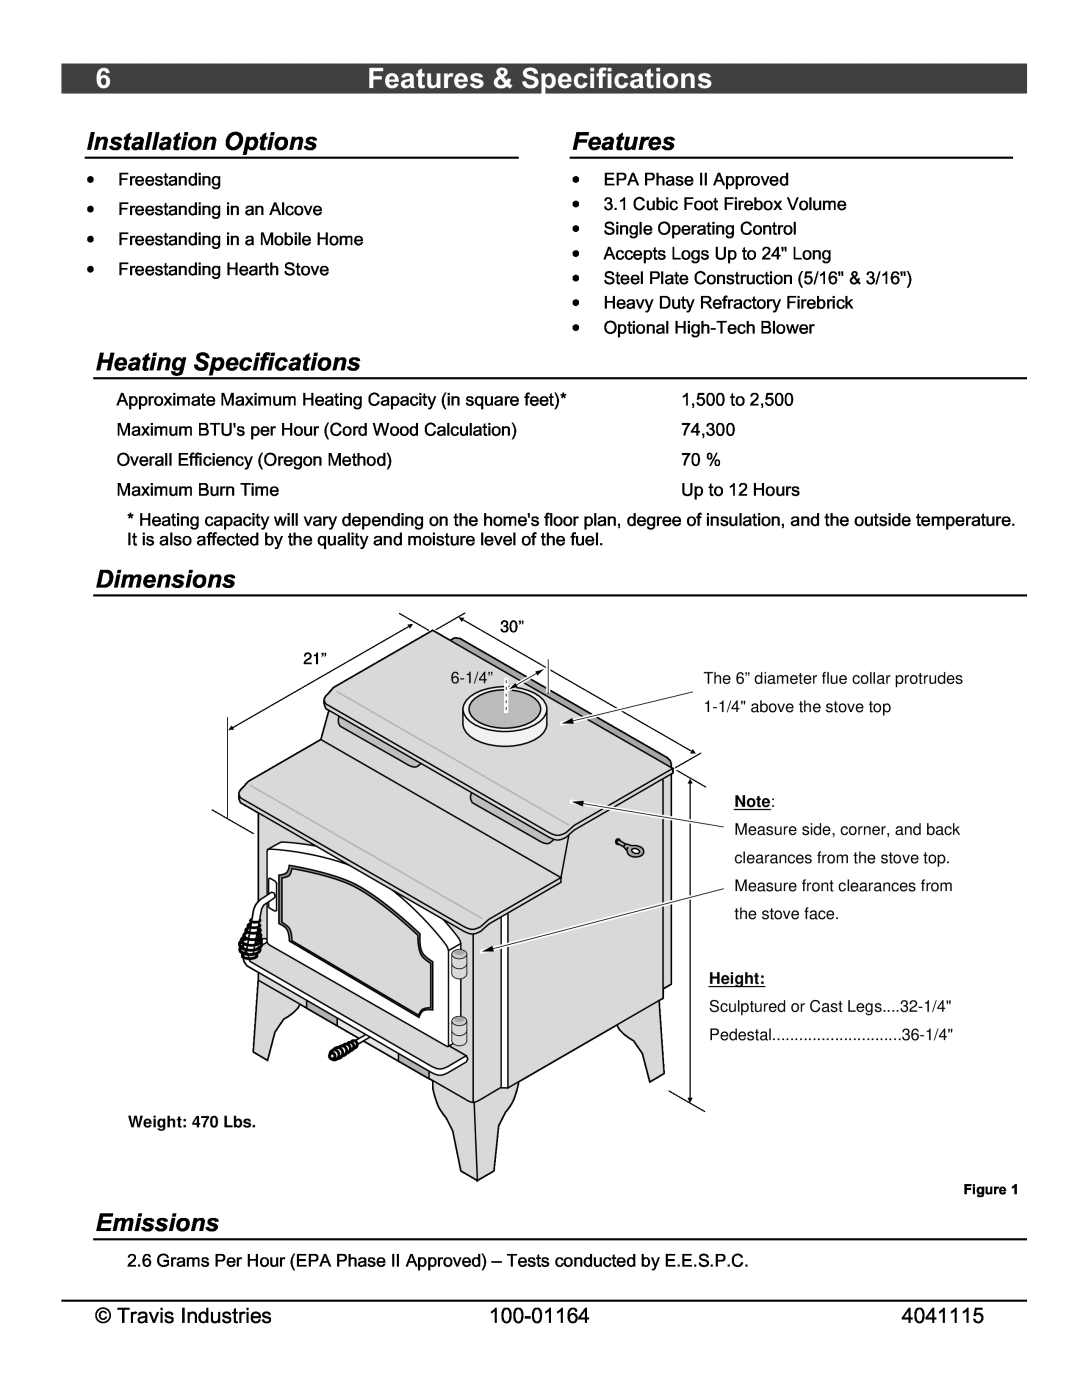 Lopi Liberty Wood Stove Features & Specifications, Installation Options, Heating Specifications, Dimensions, Emissions 